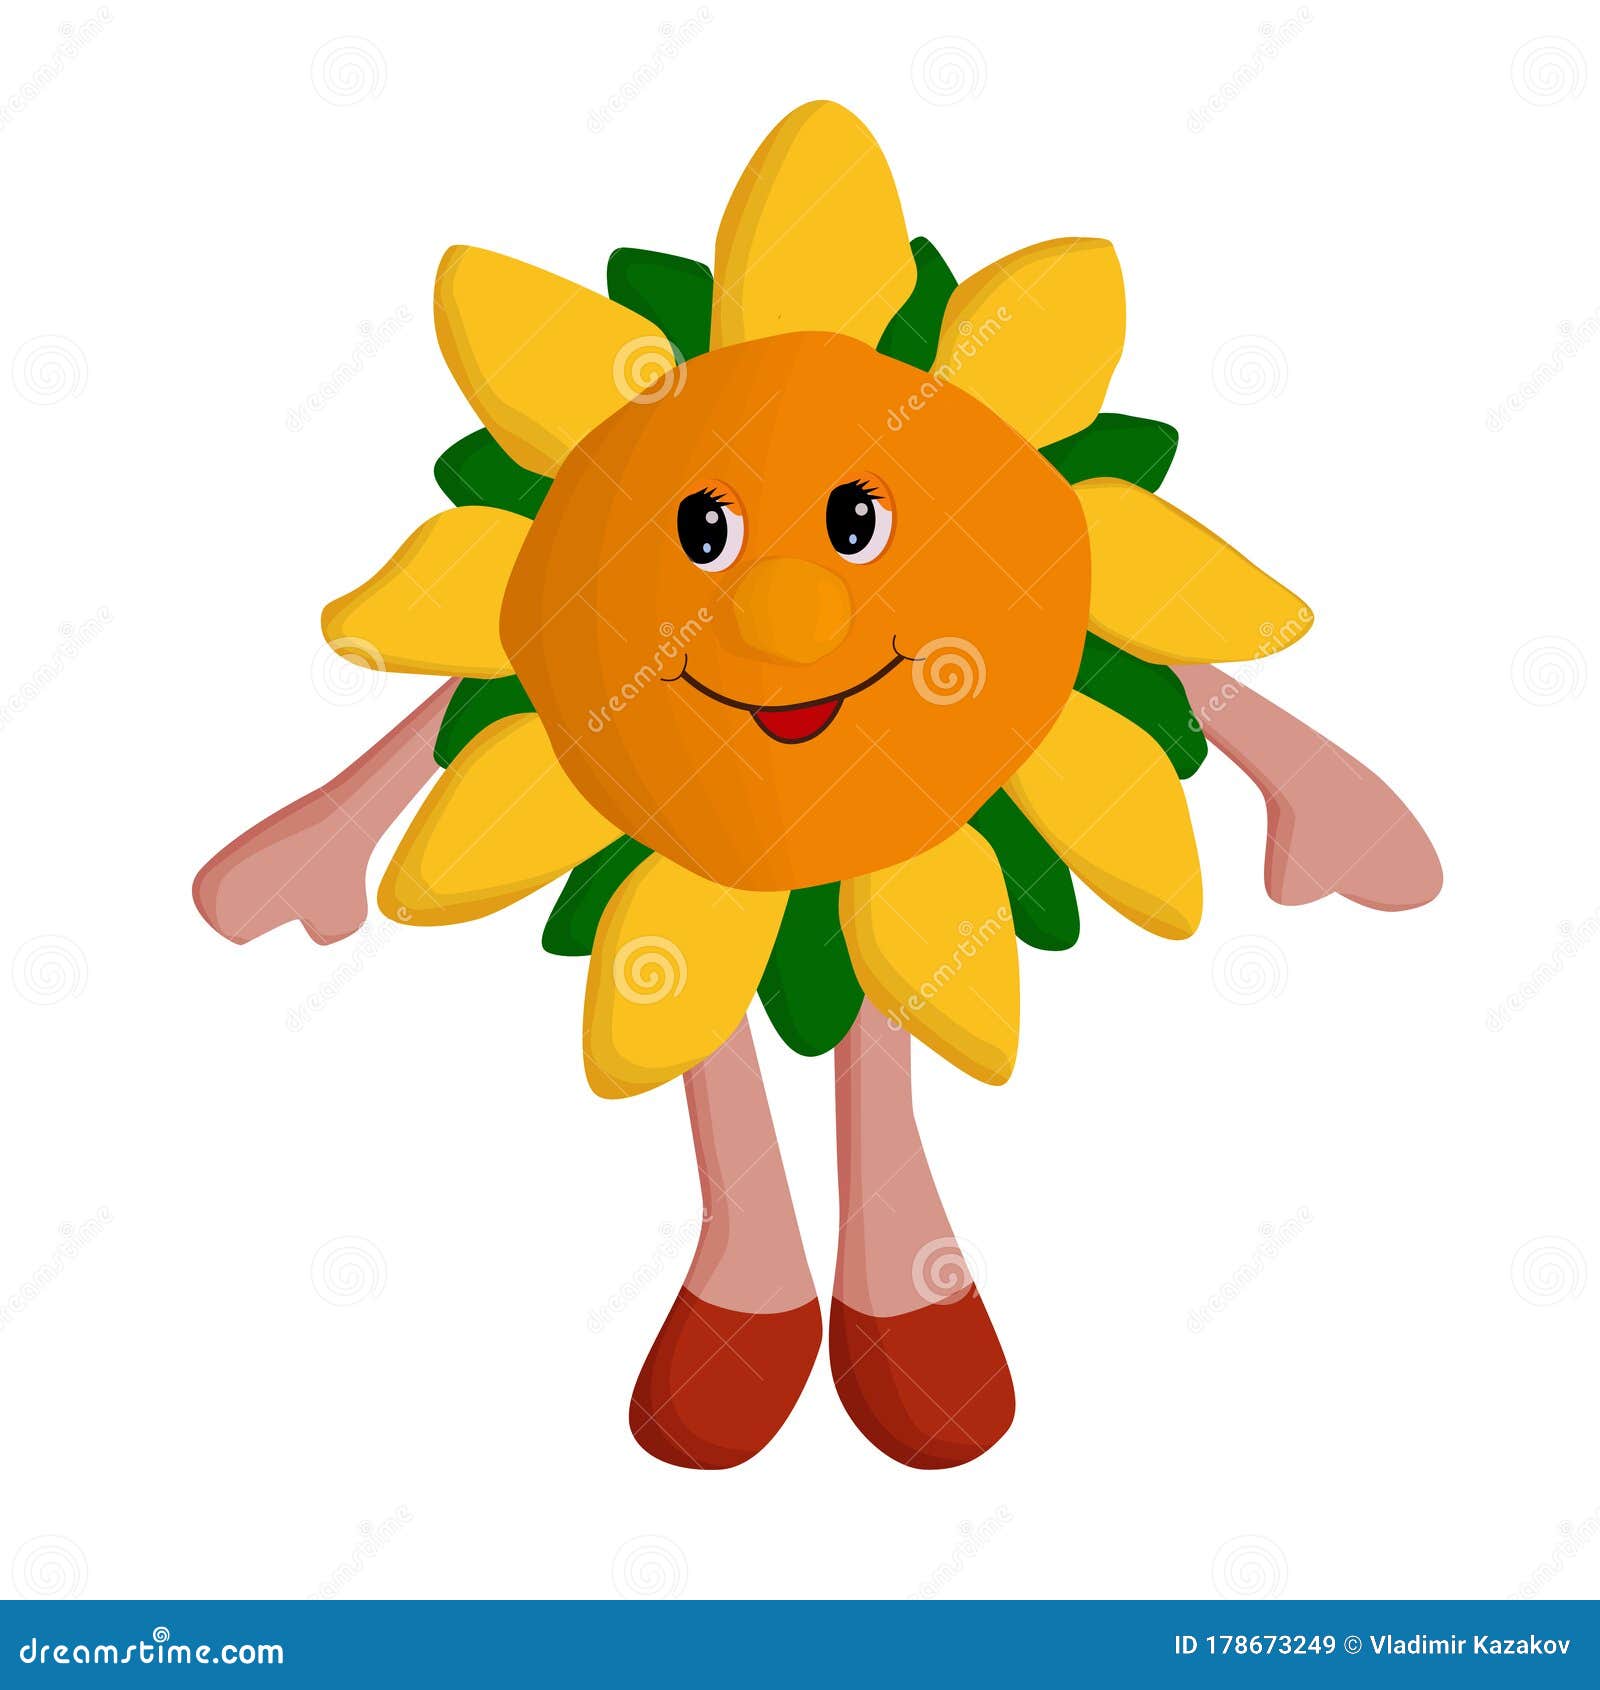 Smiling Sunflower with Arms and Legs in Cartoon Style. Stock Vector ...